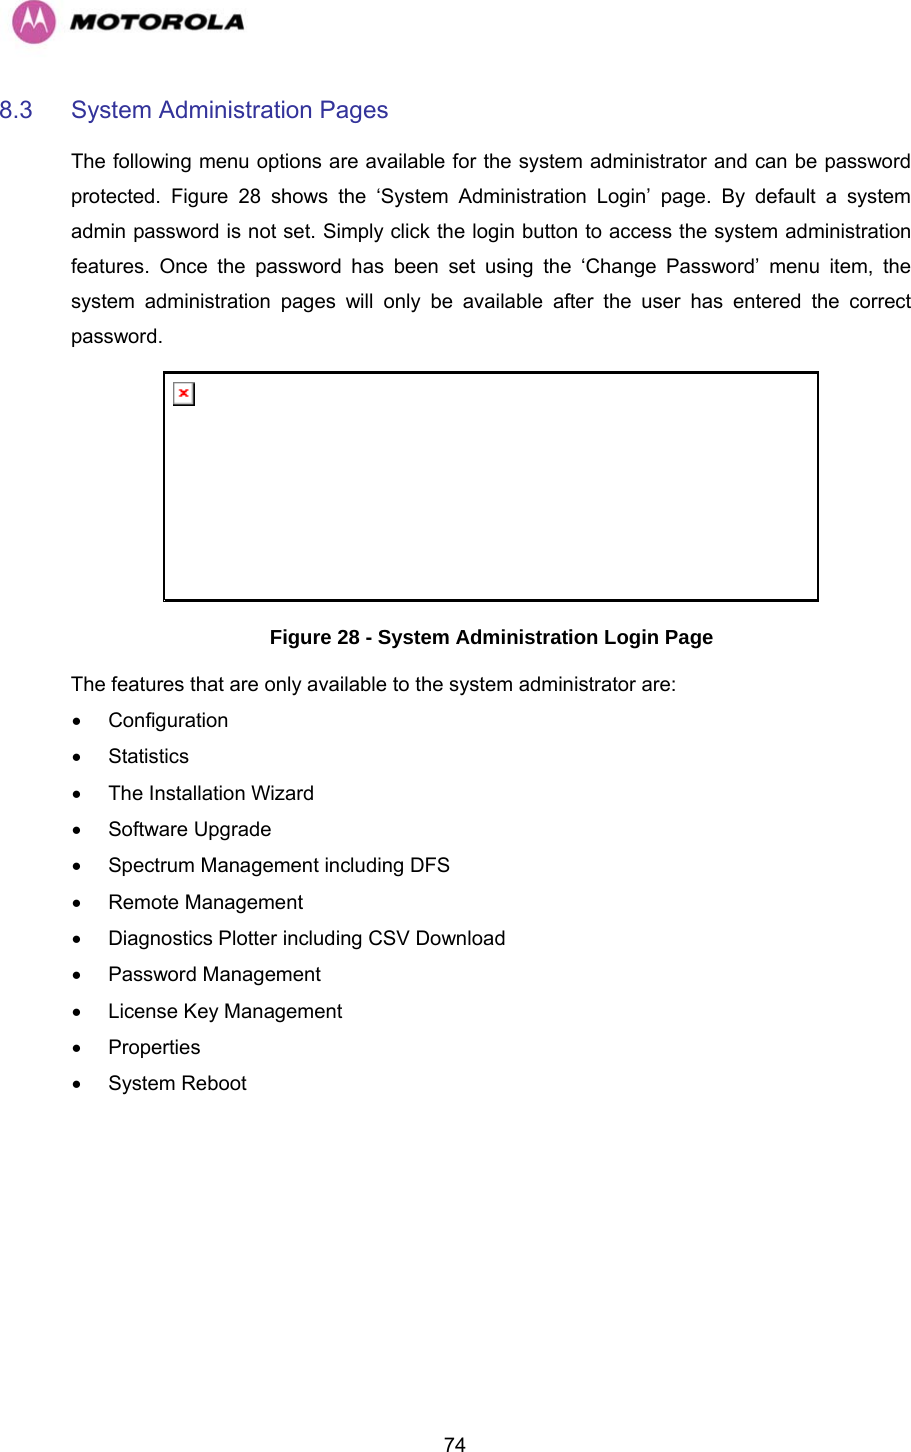   748.3 System Administration Pages  The following menu options are available for the system administrator and can be password protected. Figure 28 shows the ‘System Administration Login’ page. By default a system admin password is not set. Simply click the login button to access the system administration features. Once the password has been set using the ‘Change Password’ menu item, the system administration pages will only be available after the user has entered the correct password.  Figure 28 - System Administration Login Page The features that are only available to the system administrator are: • Configuration • Statistics •  The Installation Wizard • Software Upgrade •  Spectrum Management including DFS • Remote Management •  Diagnostics Plotter including CSV Download • Password Management •  License Key Management • Properties • System Reboot 